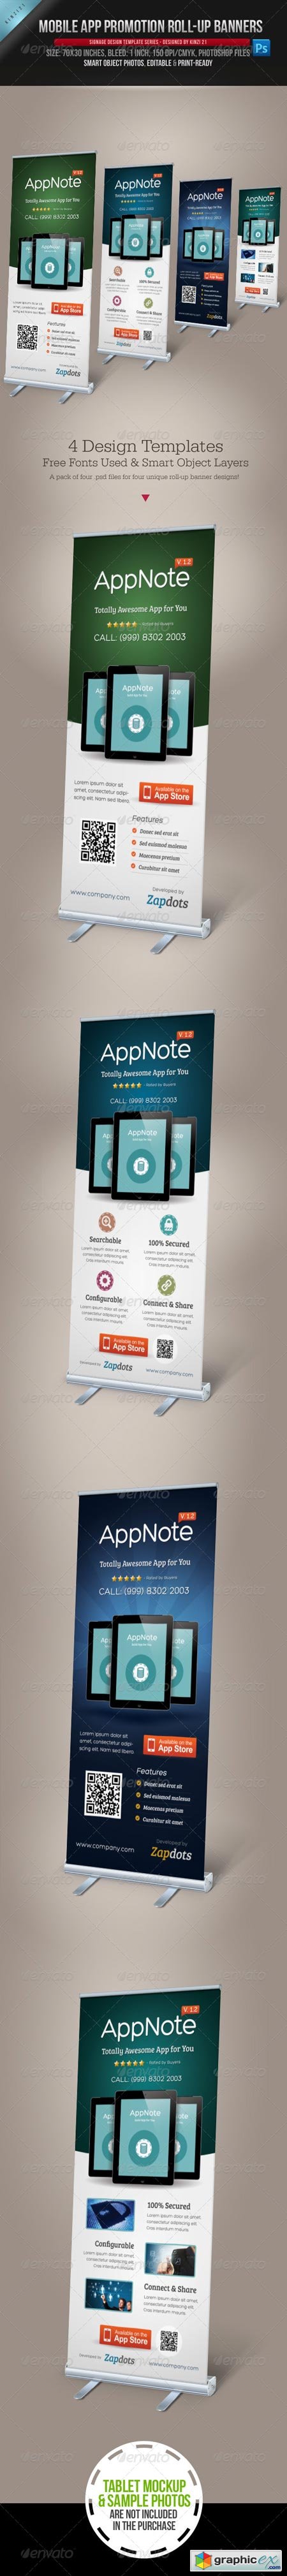 Mobile App Promotion Roll-up Banners 4042603